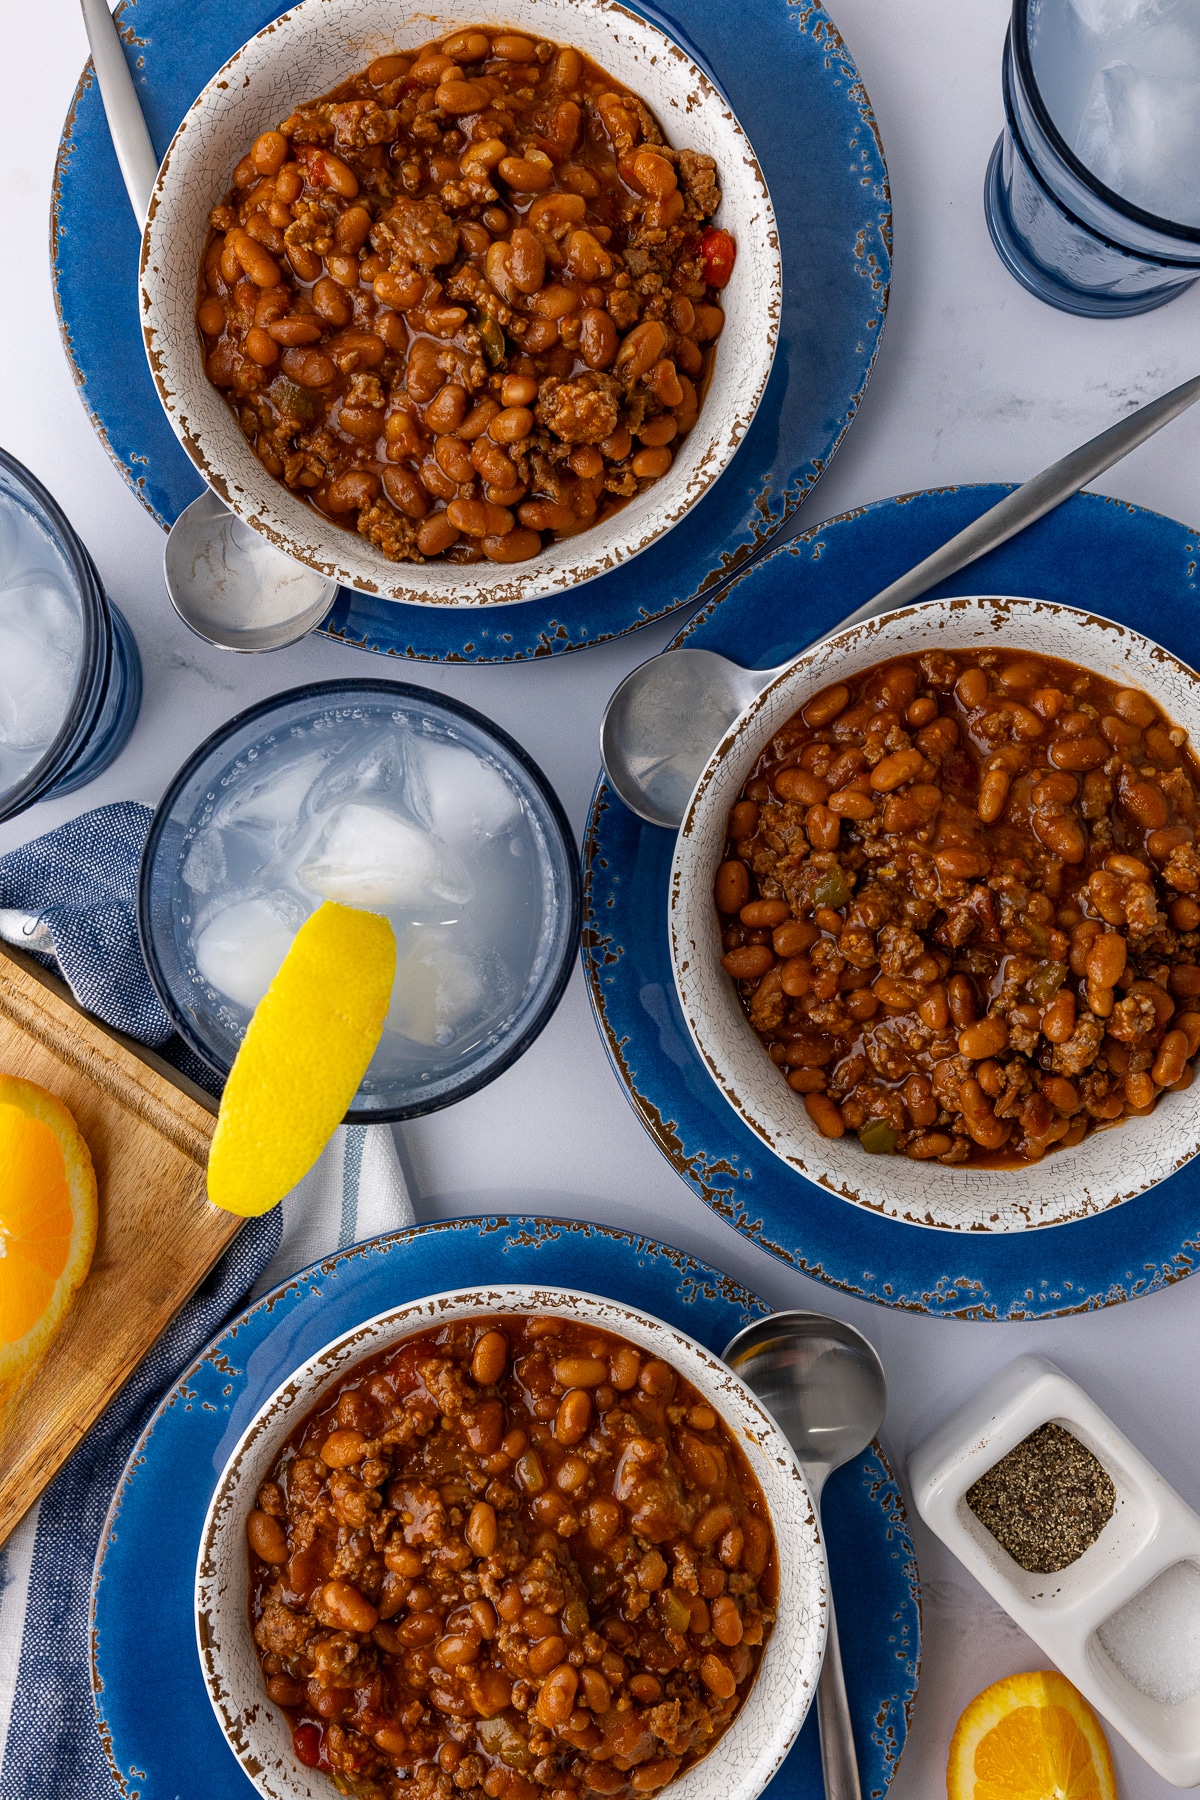 3 bowls of baked beans sitting on blue plates and a  striped napkin on a white countertop, with a soda, lemon wedge, and a salt and pepper holder